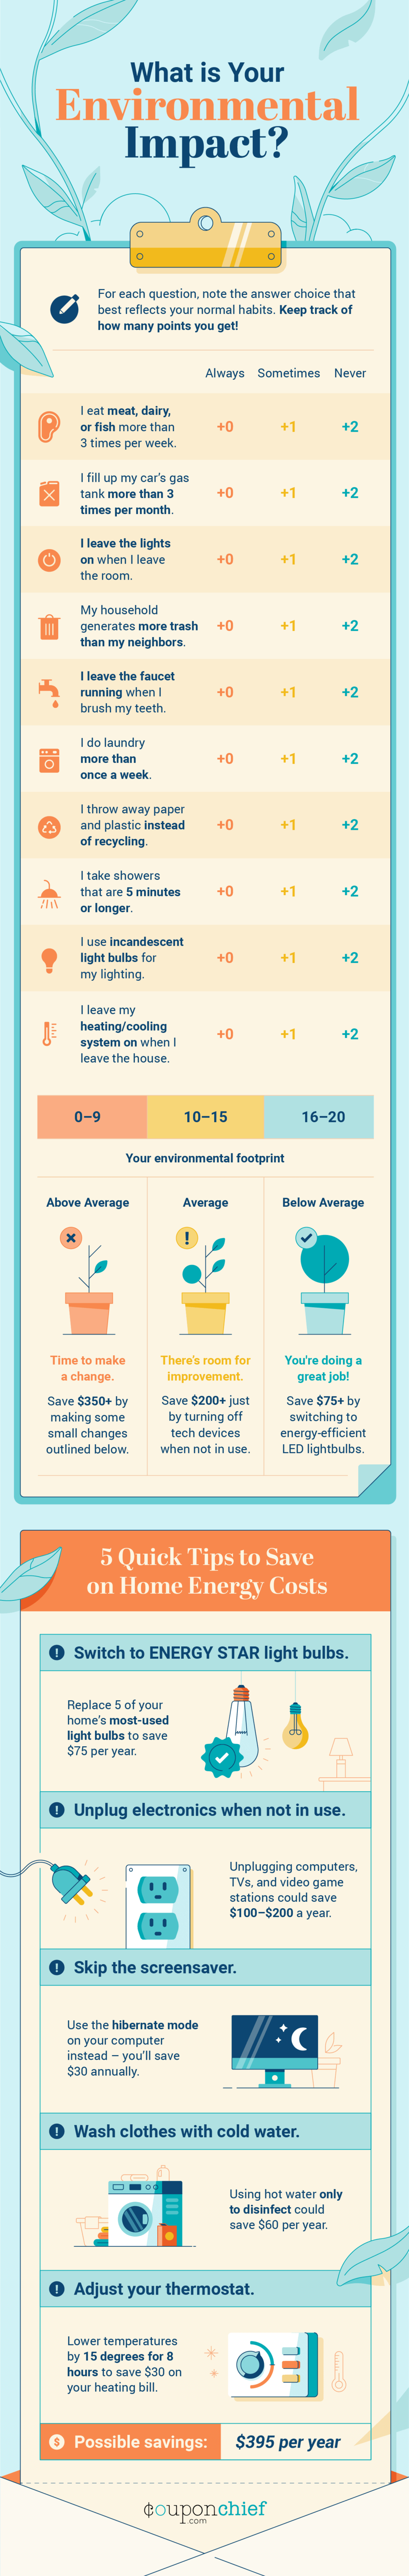 Infographic: What’s Your Environmental Footprint?